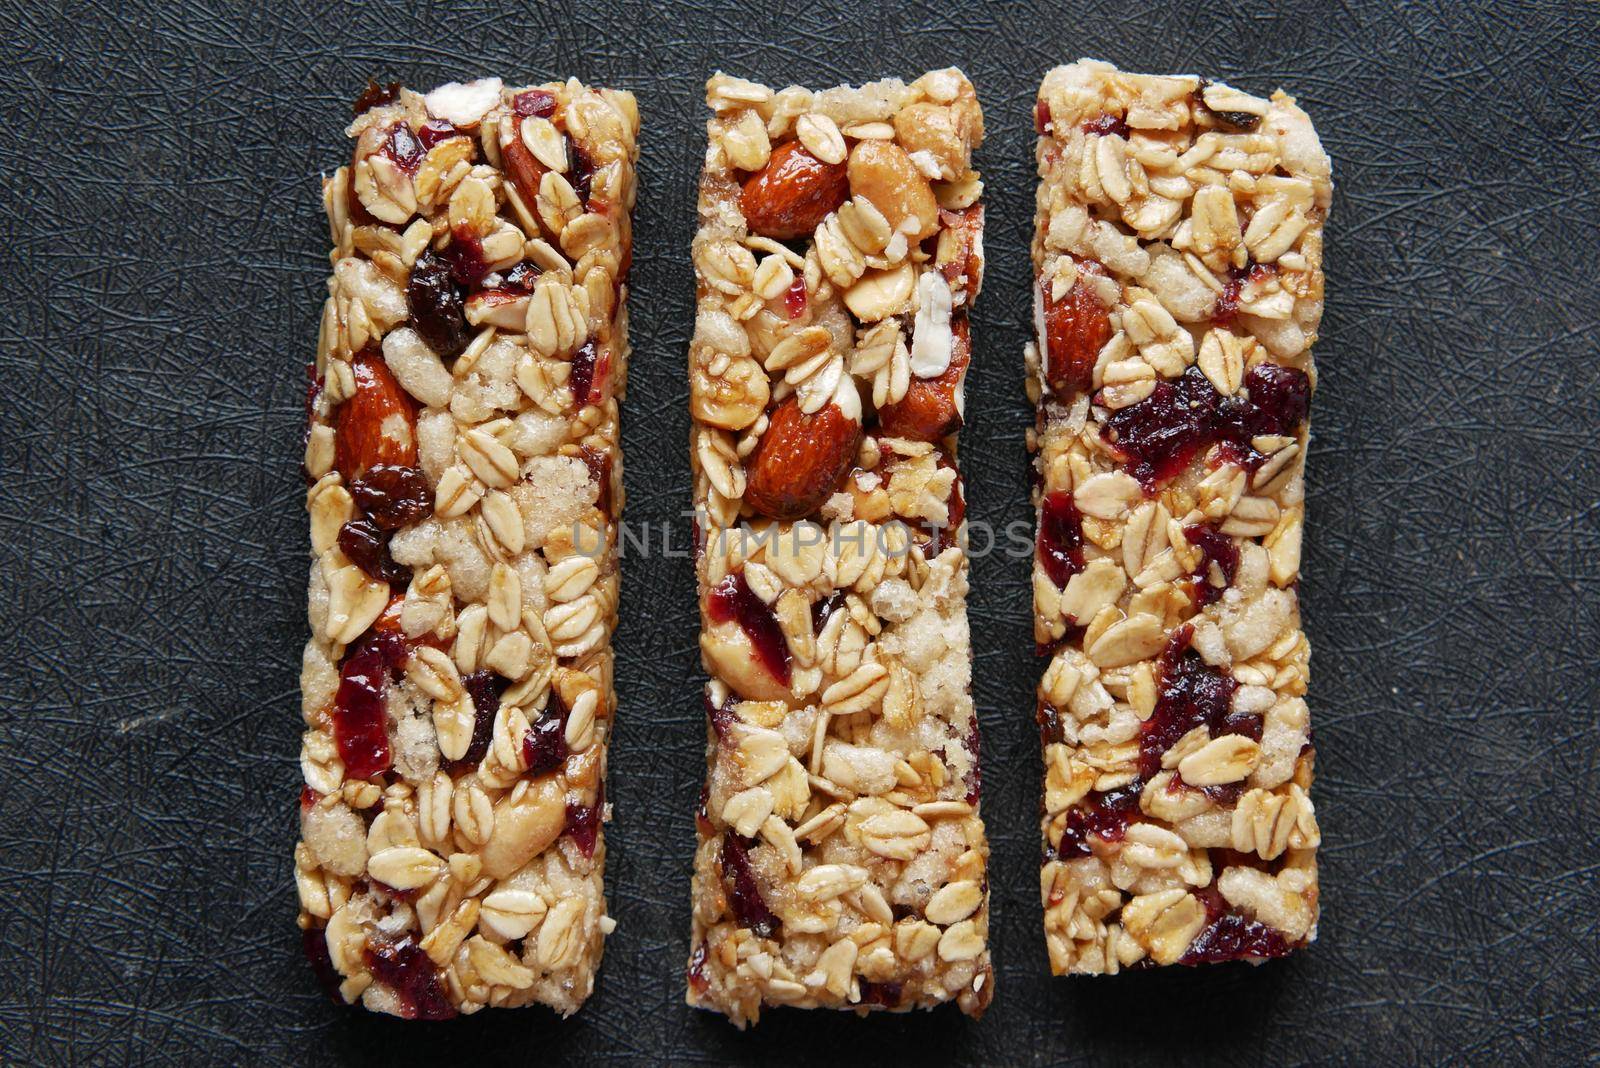 Almond , Raisin and oat protein bars on table .